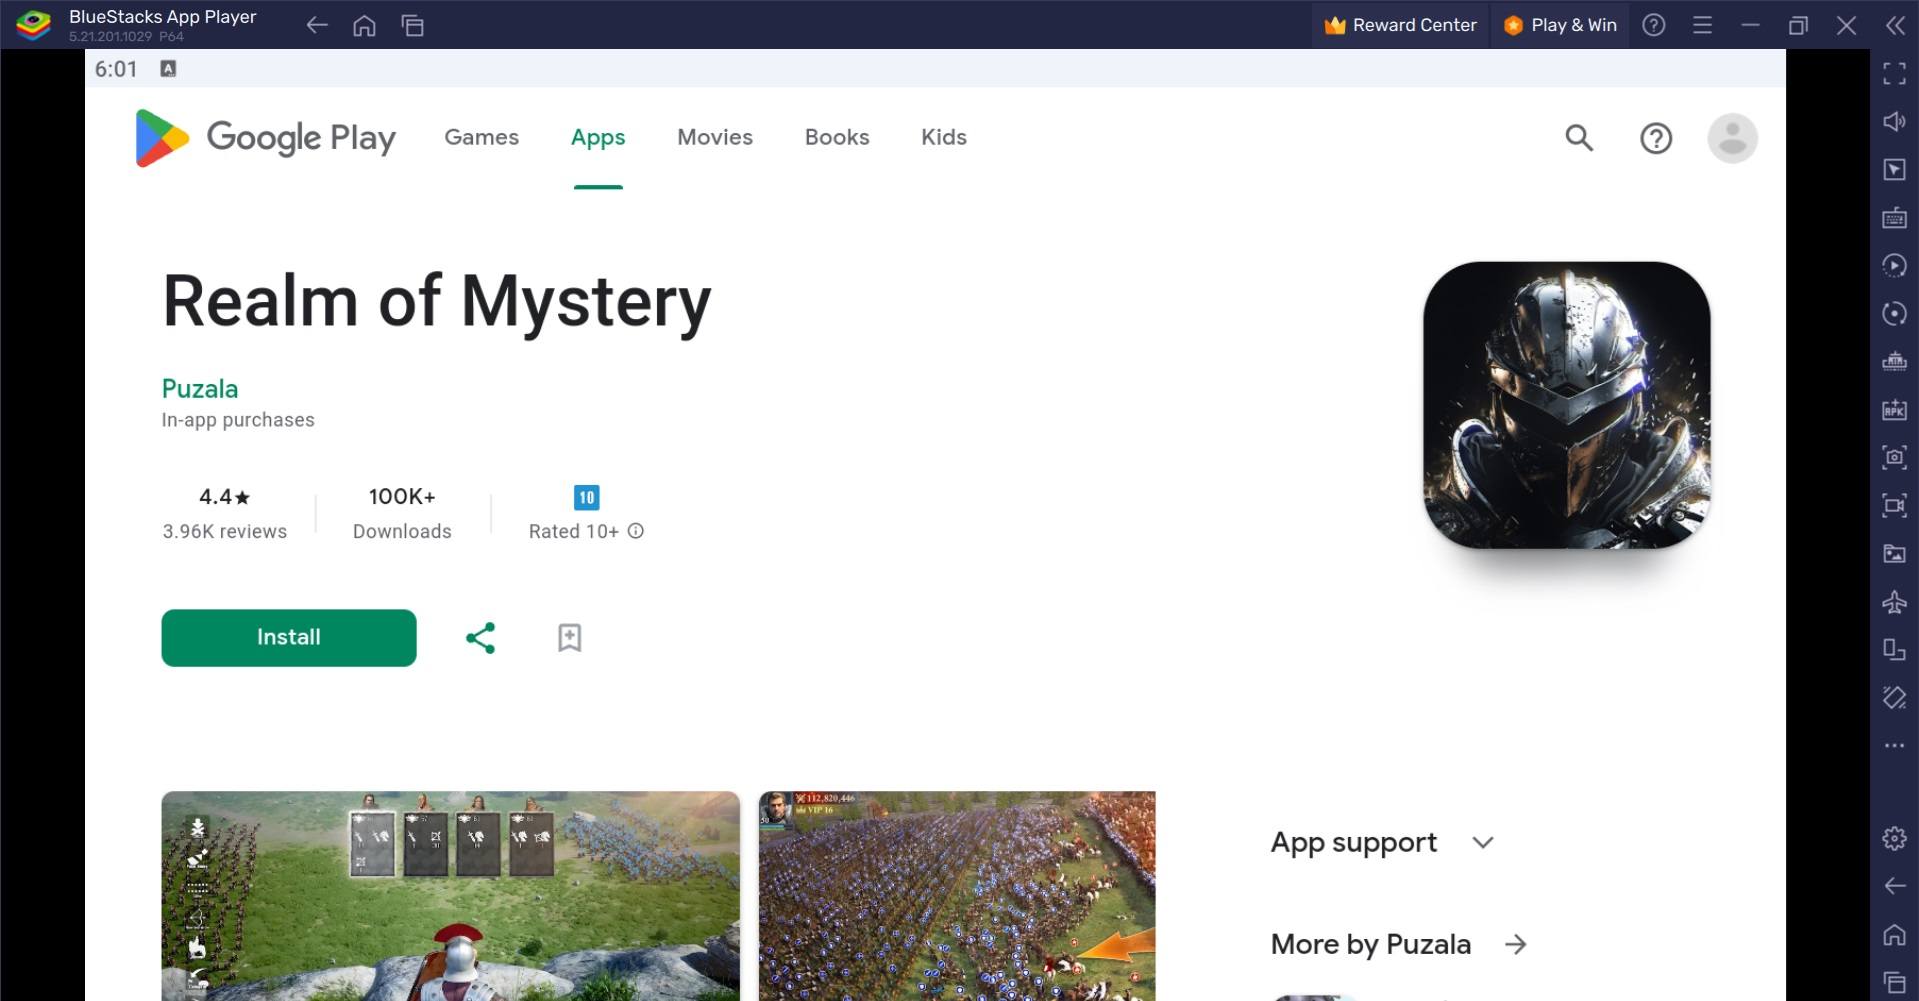 How to Play Realm of Mystery on PC with BlueStacks